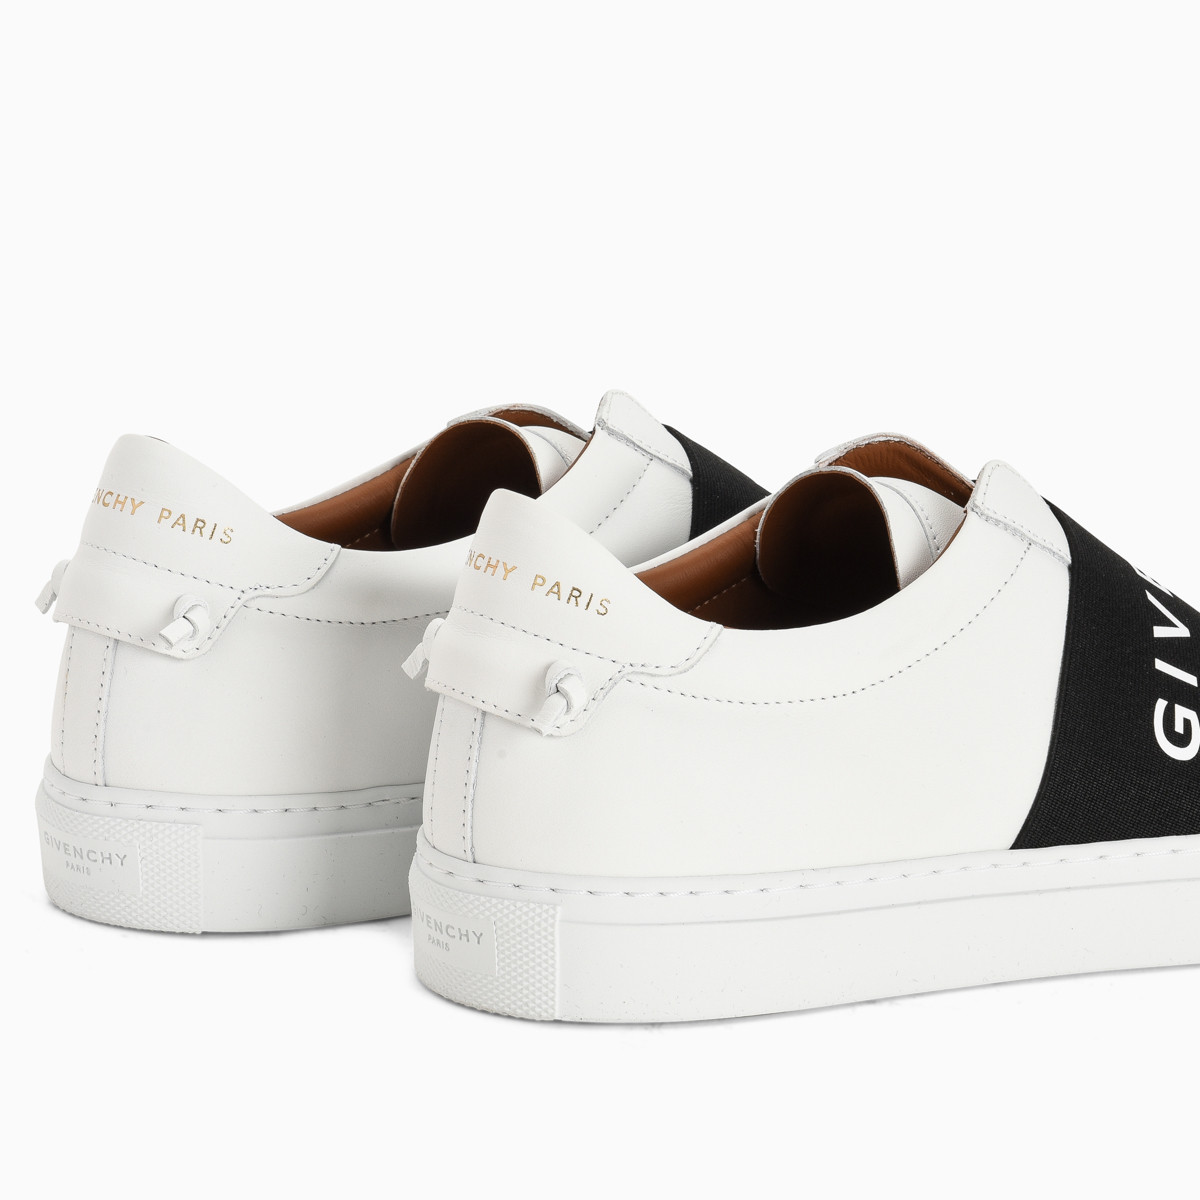 A Selection of Top designer Sneakers for Women View the VIBE Toronto